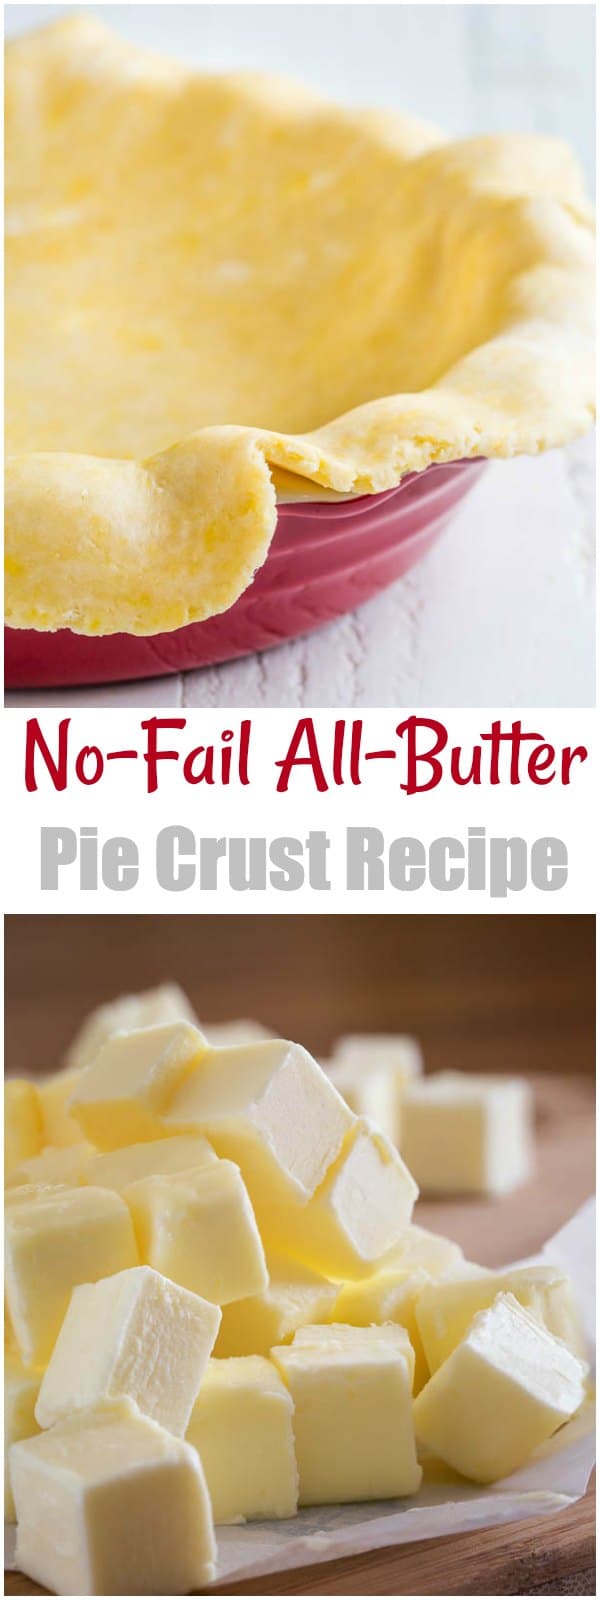 Foolproof All-Butter Pie Crust Recipe ~Sweet & Savory by Shinee